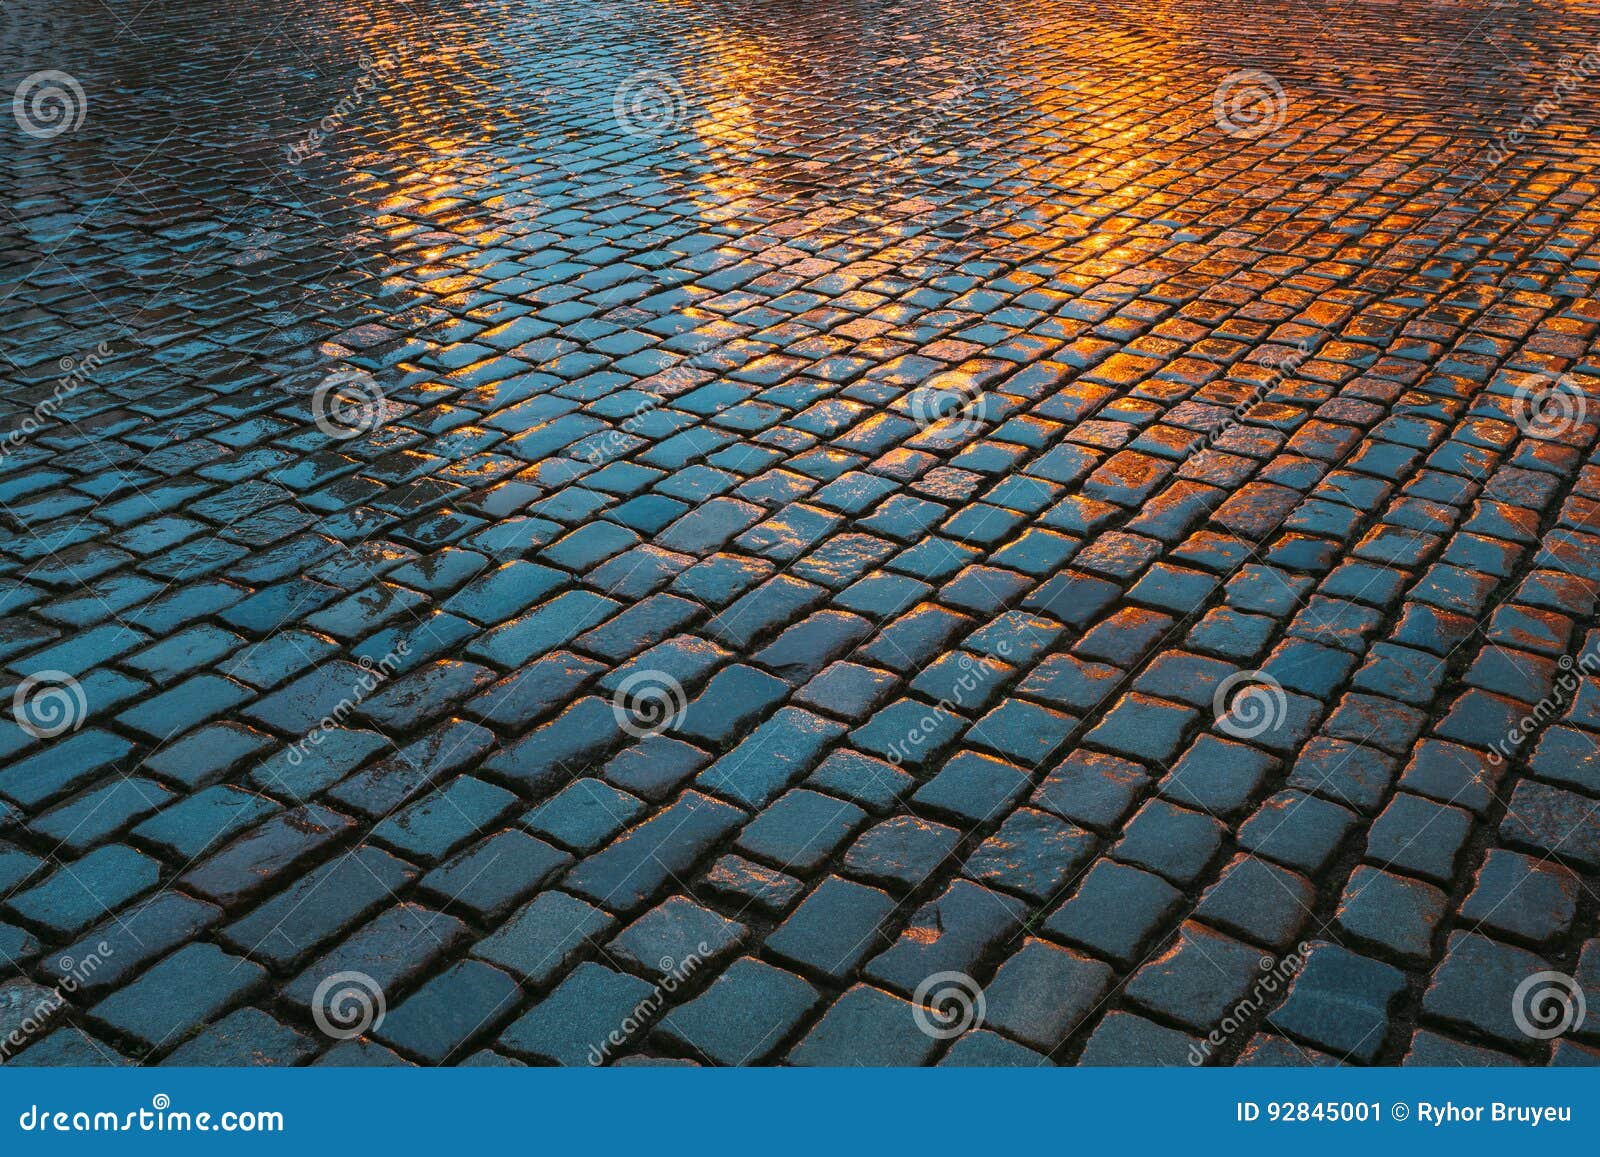 old streets cobblestone abstract background. wet stones in evening